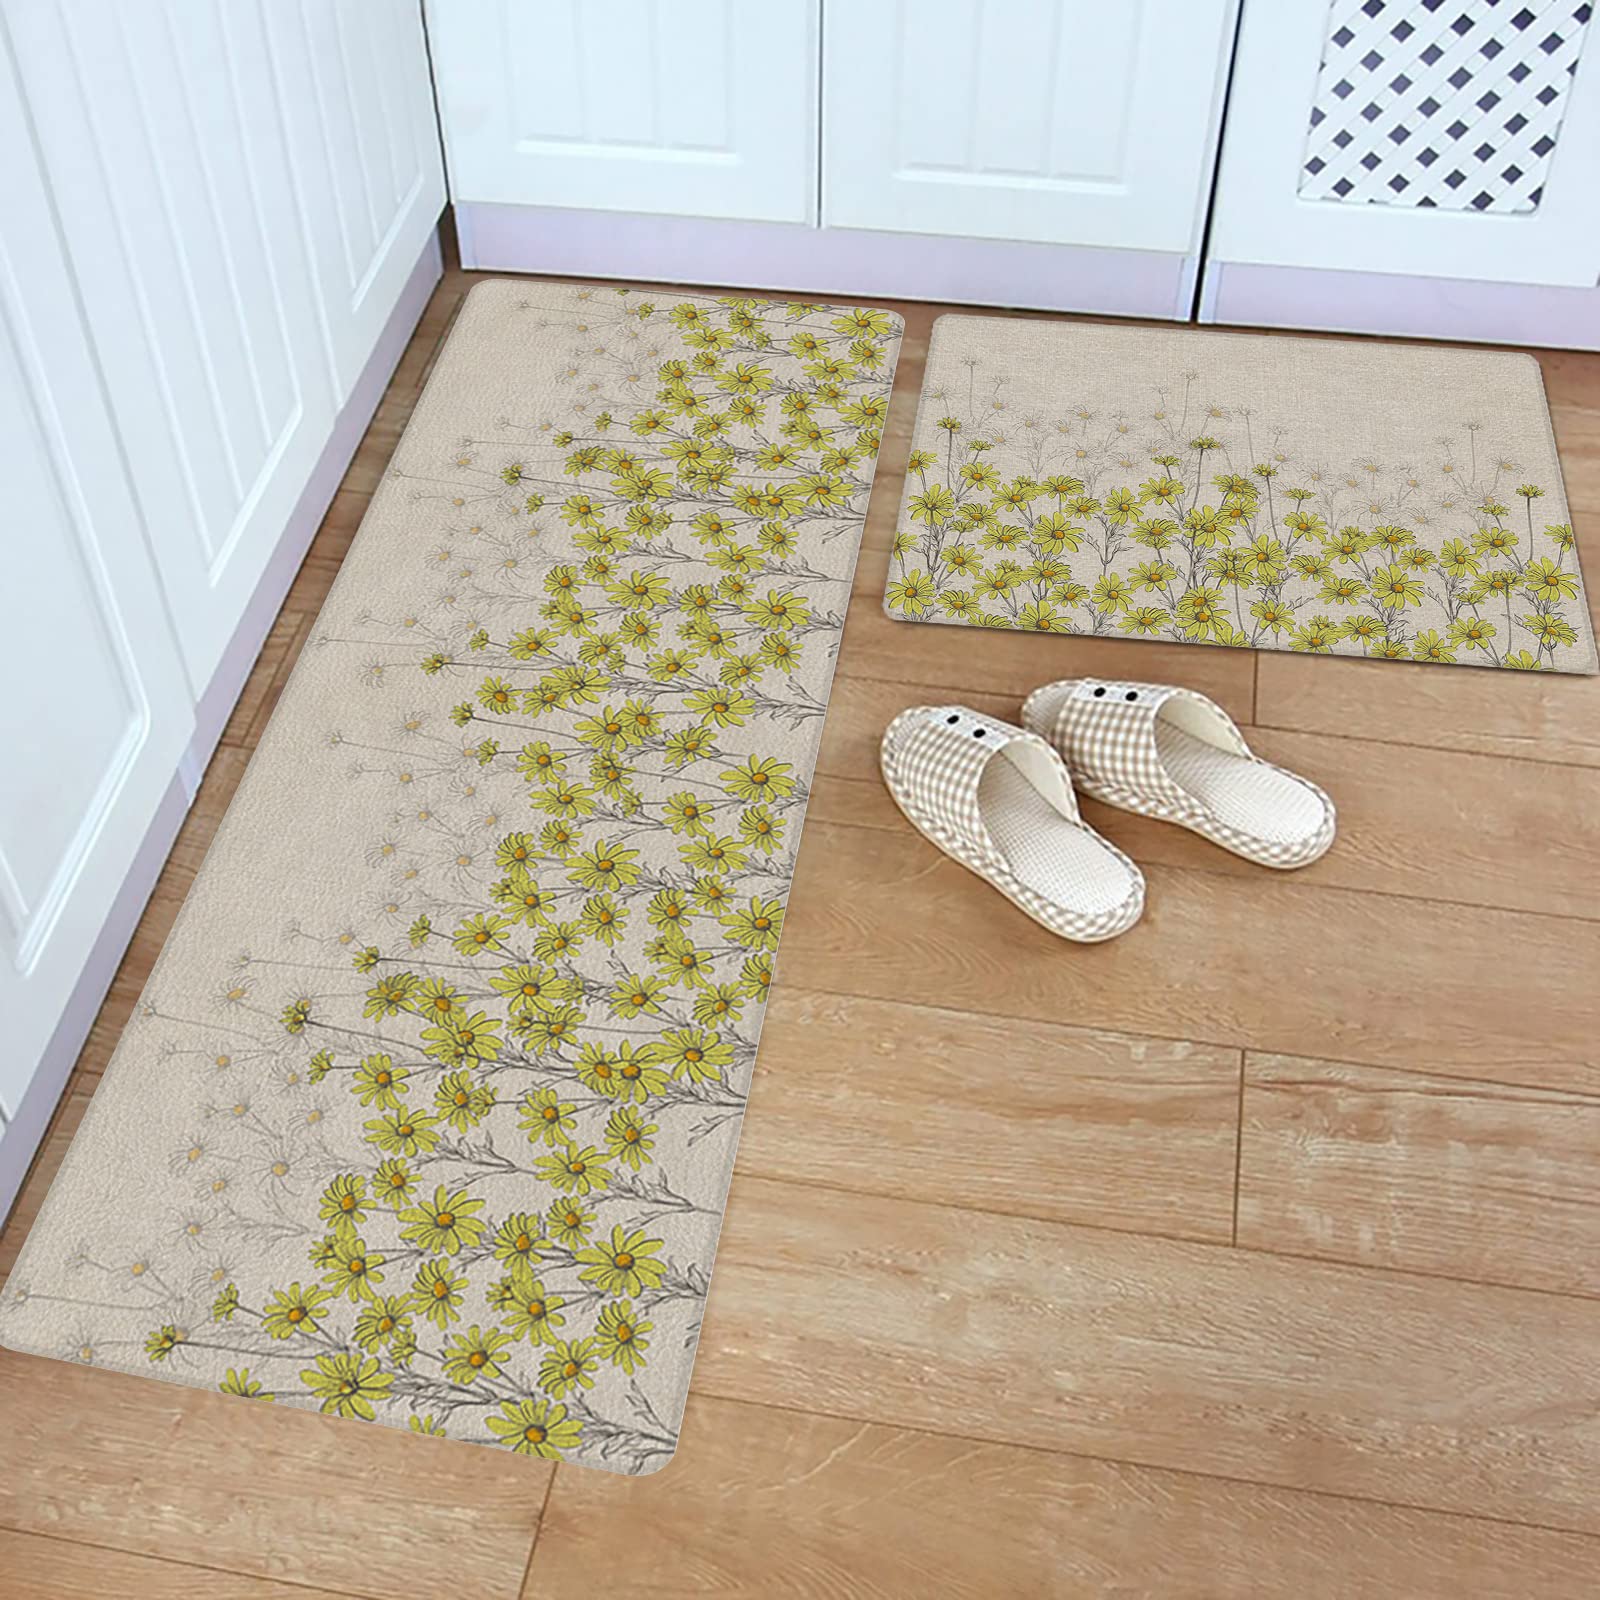 Farm Lines Flower Anti-Fatigue Rugs and Mats Set for Kitchen Floor, 2 Piece PVC Heavy Duty Standing Area Runner Mat Spring Yellow Daisy Floral Retro Burlap Home Decor Carpet